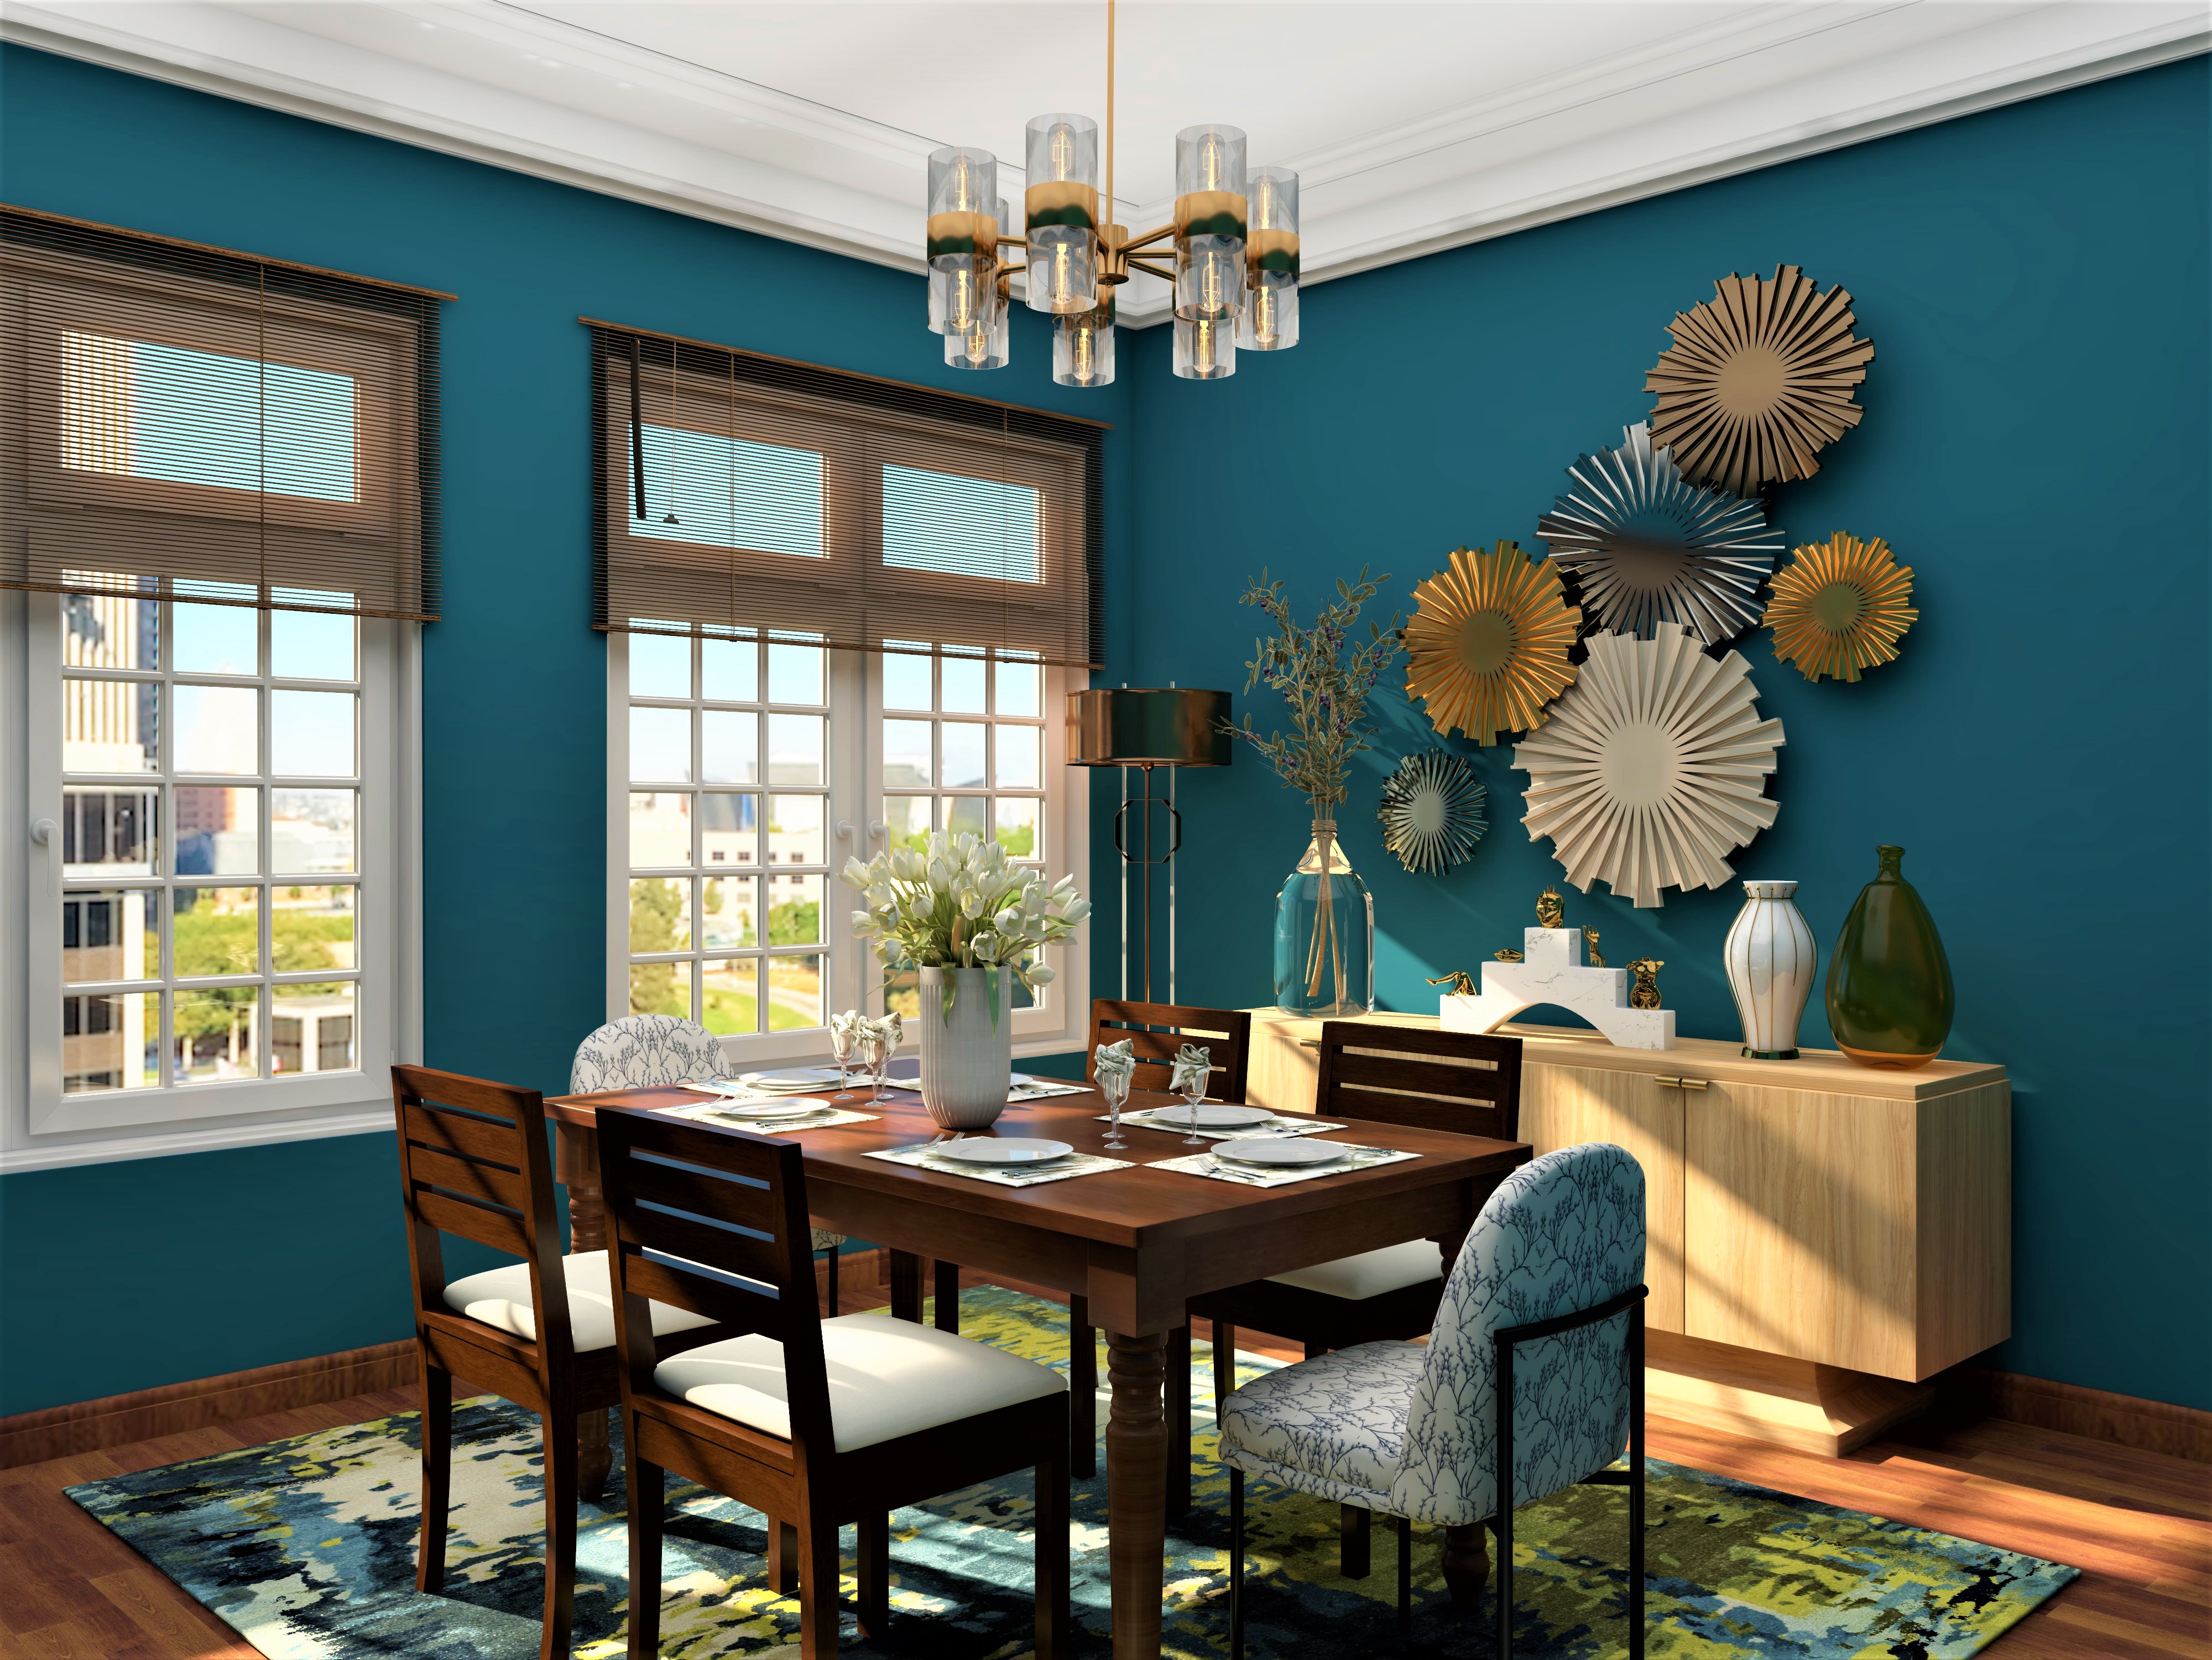 Dining room design with wooden dining table and blue walls-Beautiful Homes